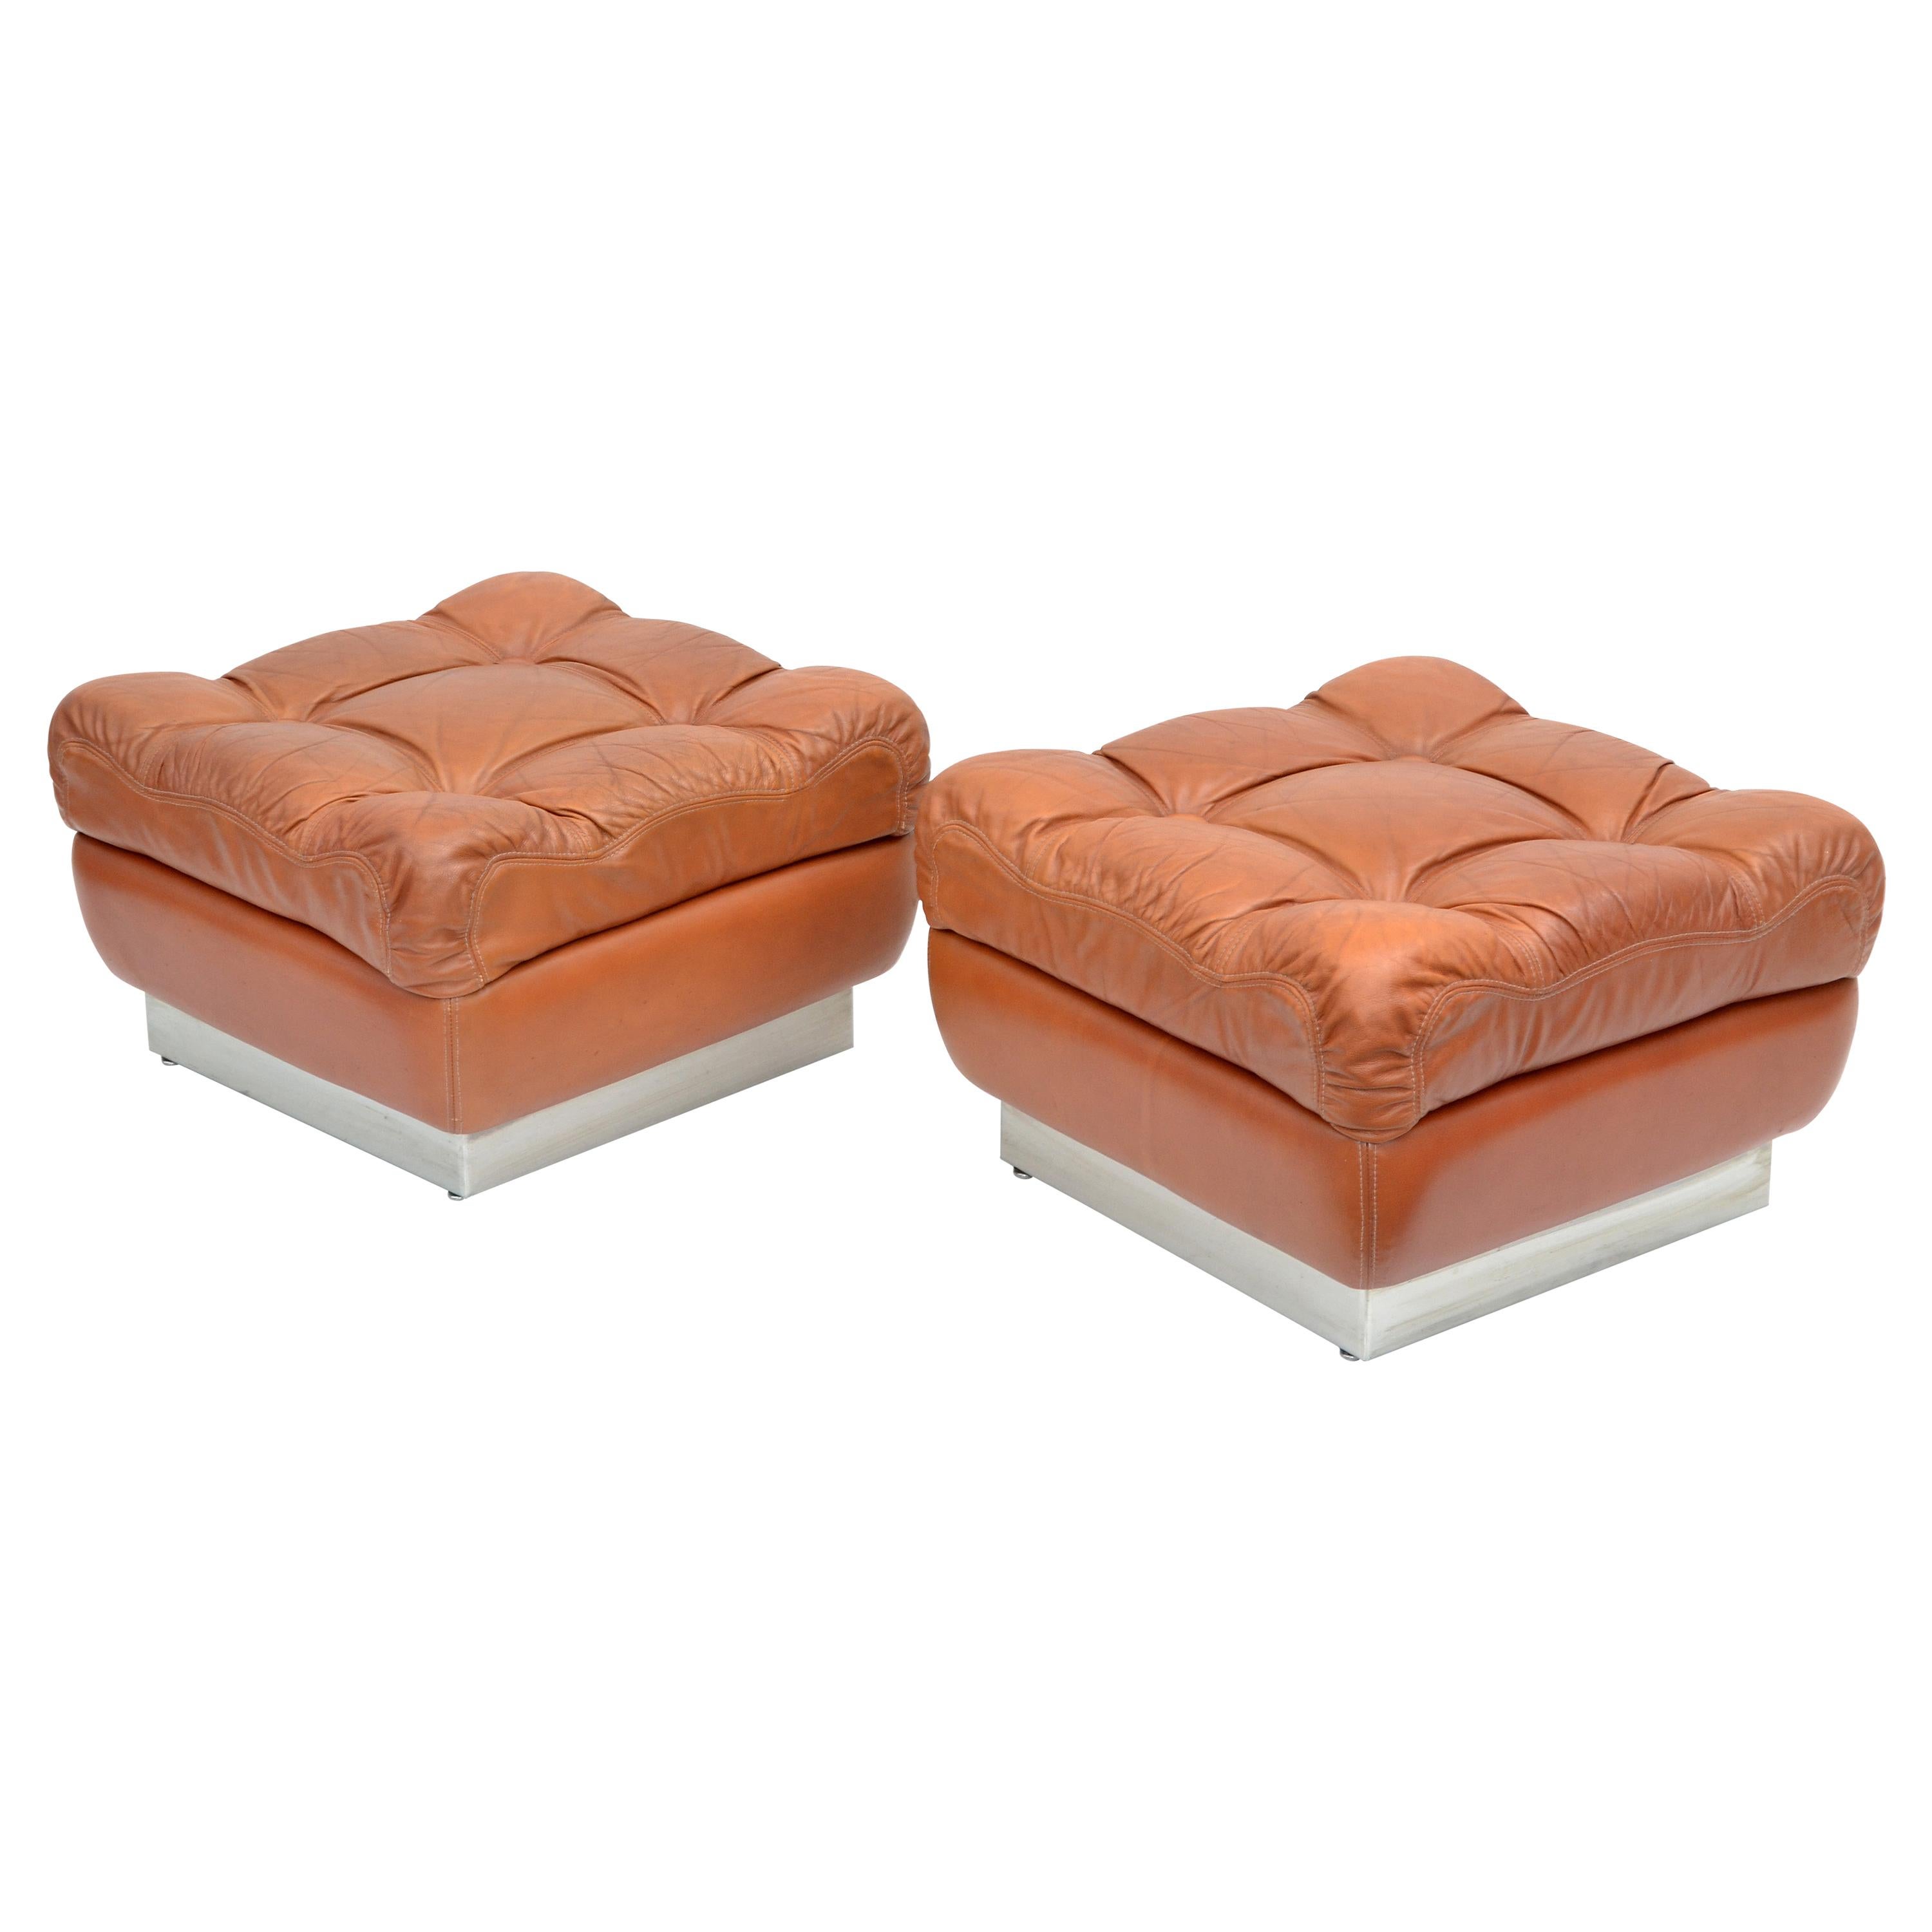 Jacques Charpentier Mid-Century Modern Tufted Leather Ottoman Stool Pair